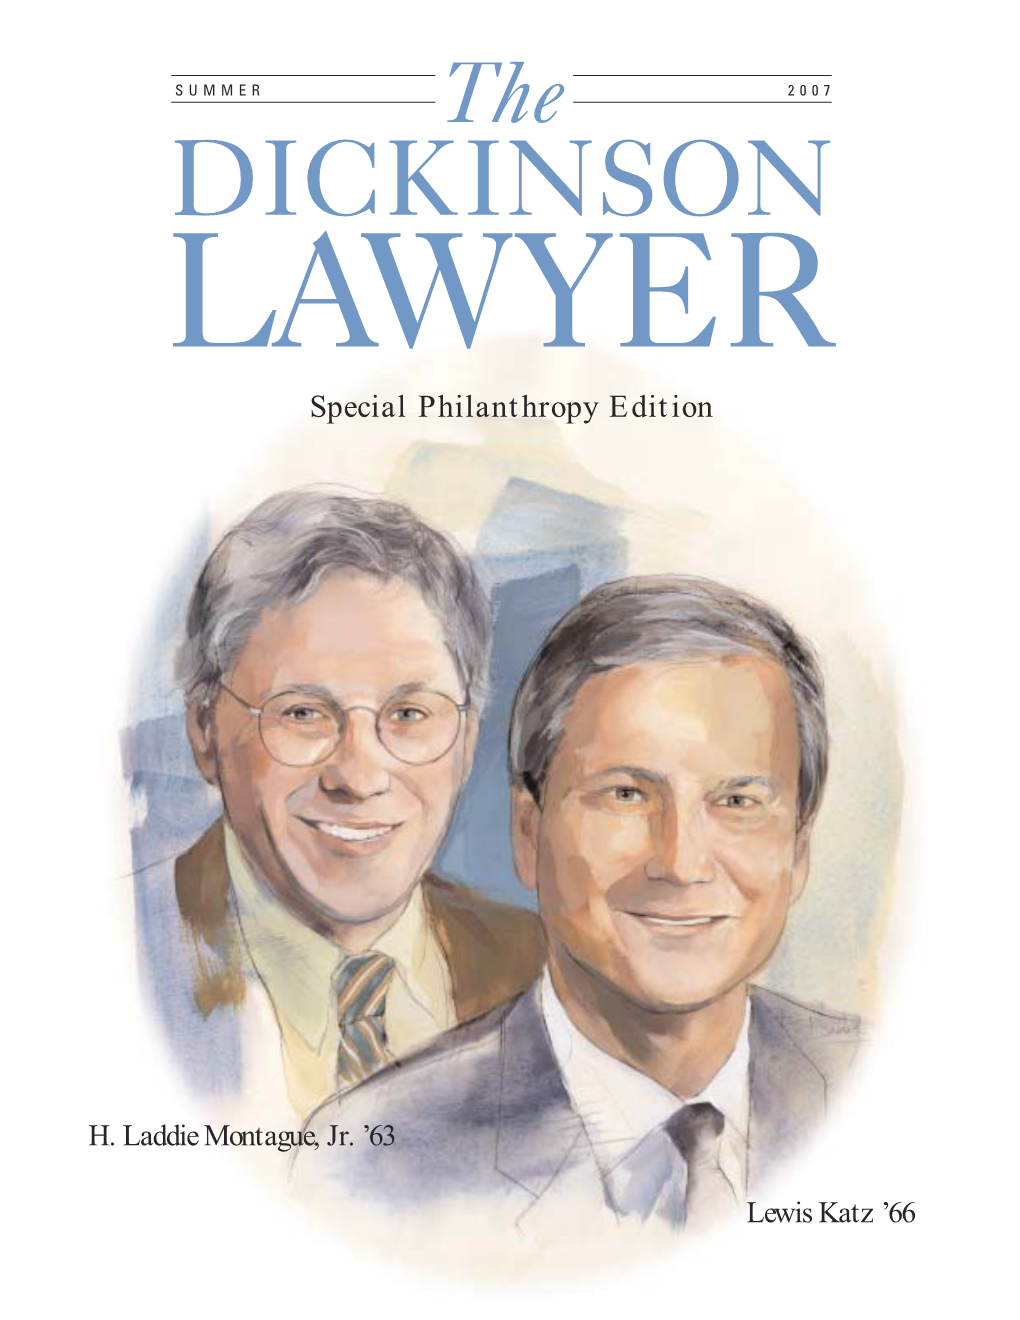 DICKINSON LAWYER Special Philanthropy Edition